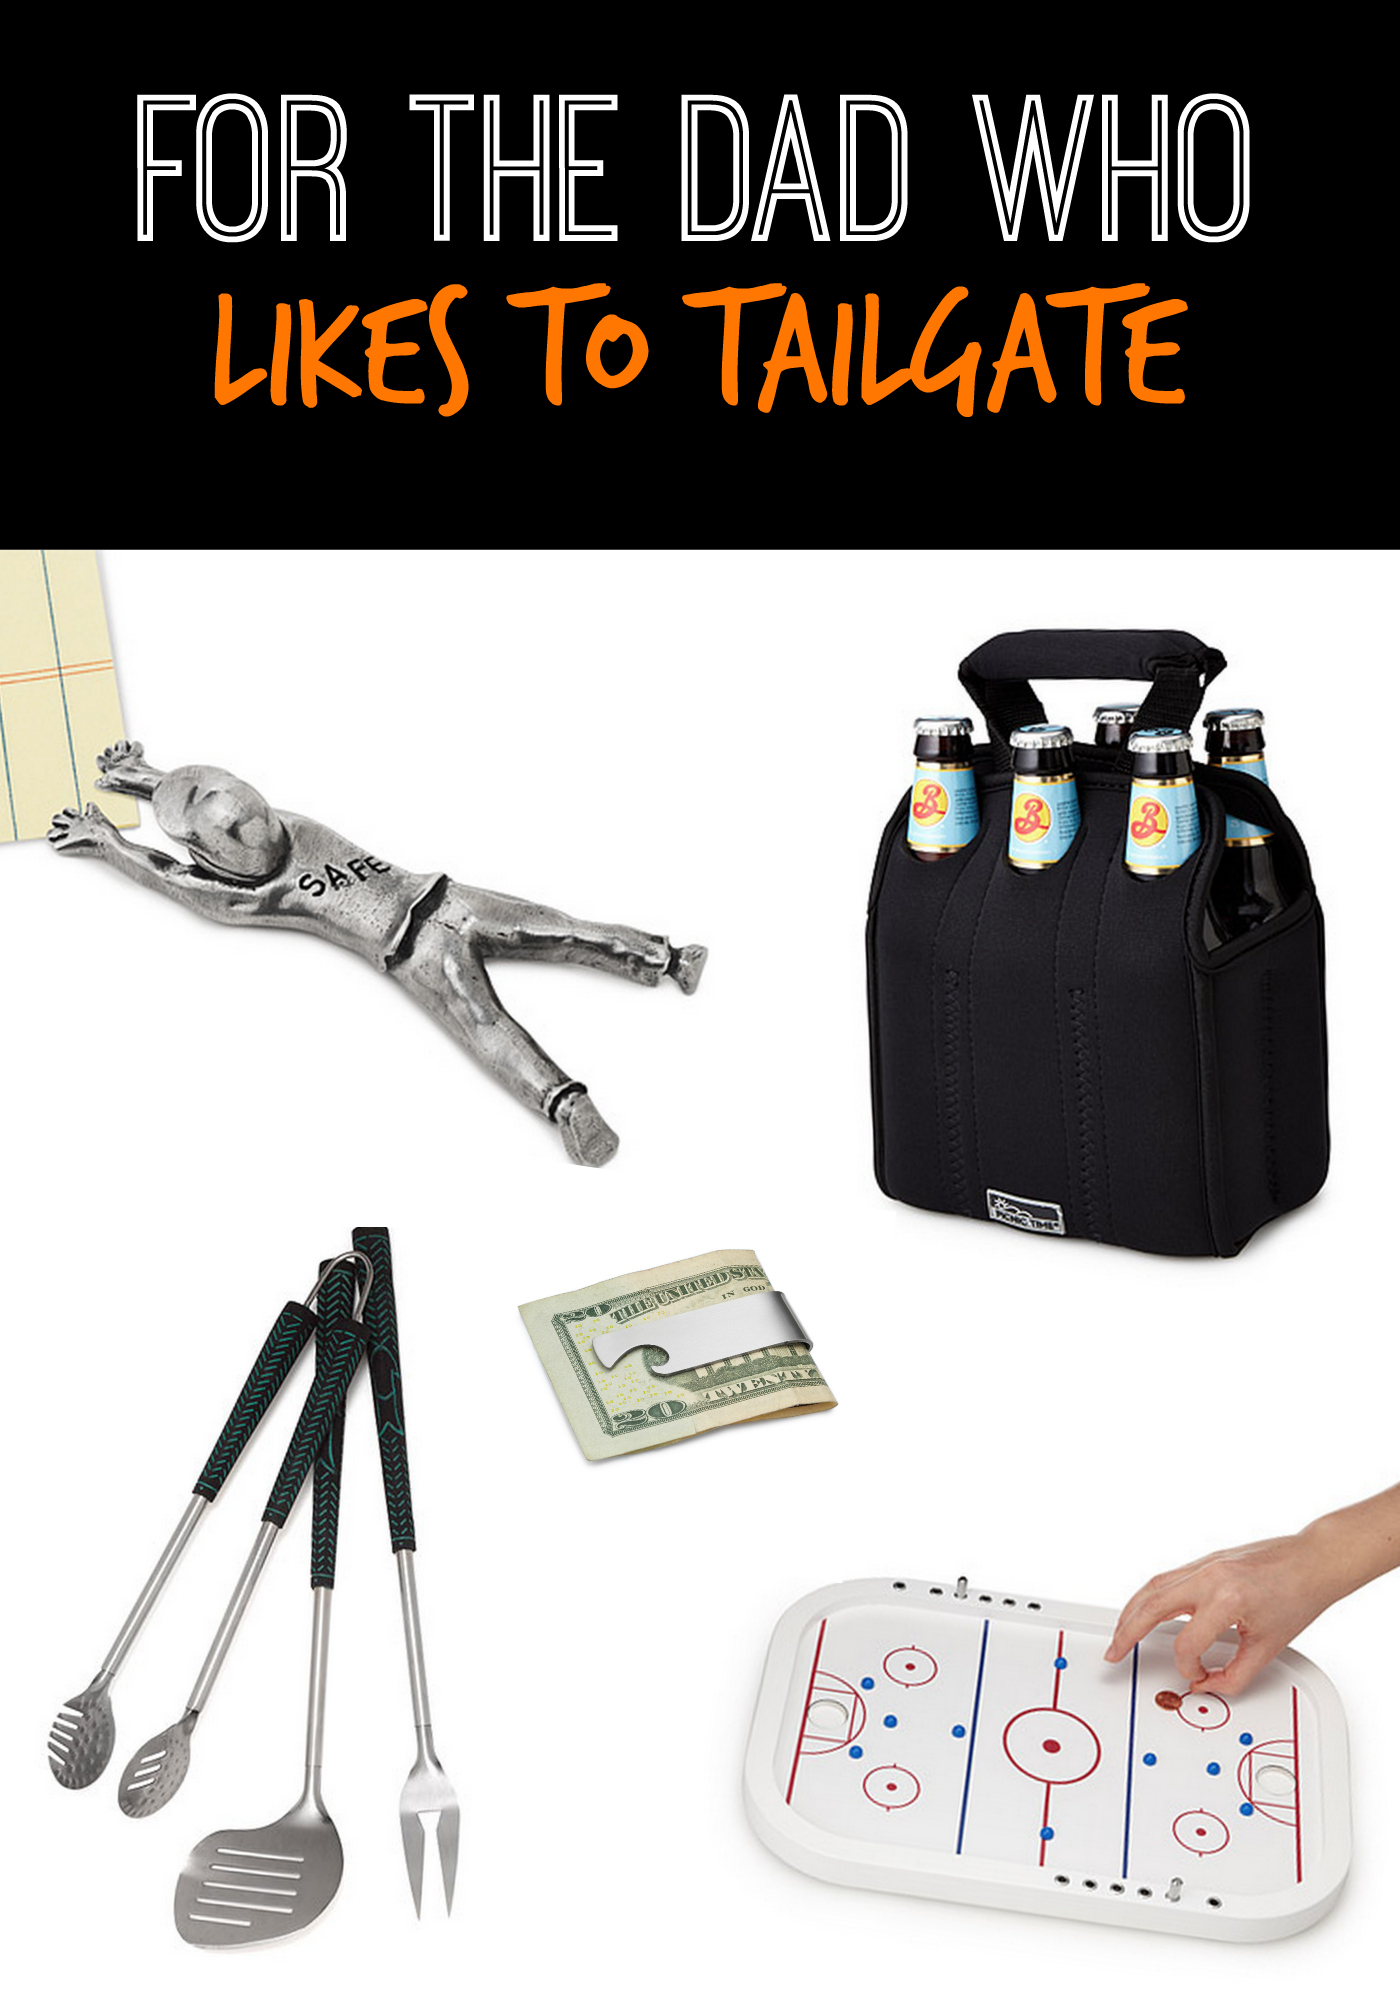 For the Dad Who Likes to Tailgate